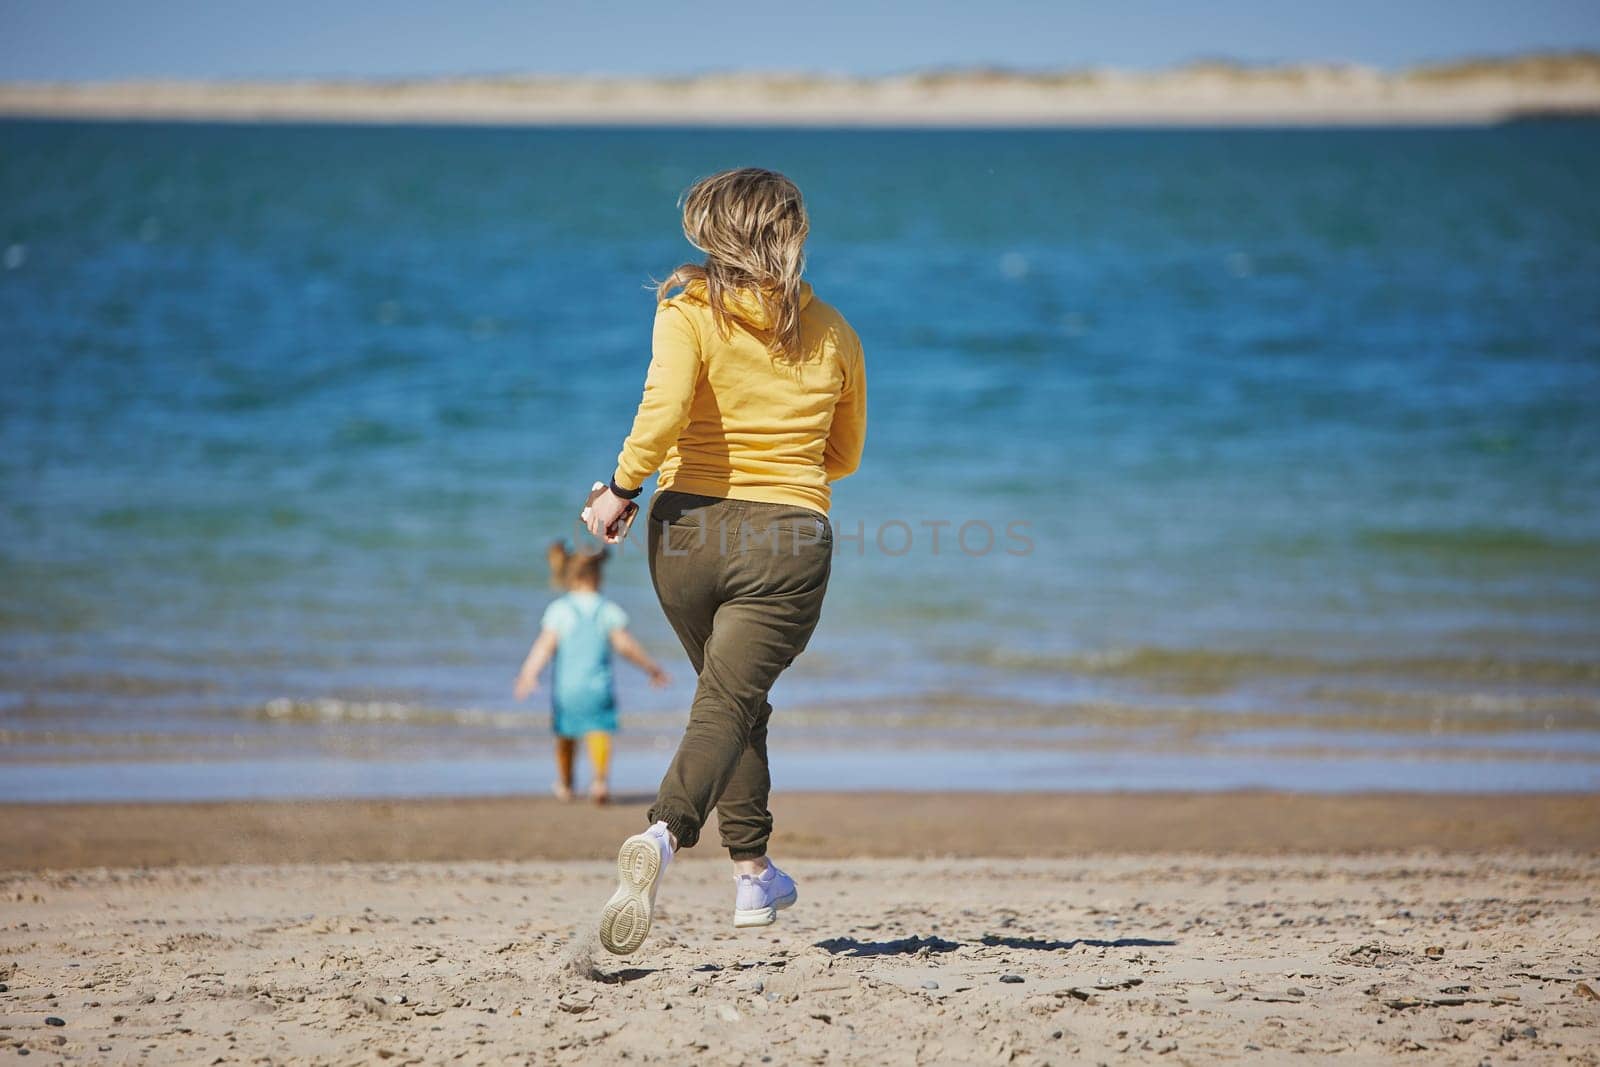 Mom catches up with her daughter on the beach in Denmark.